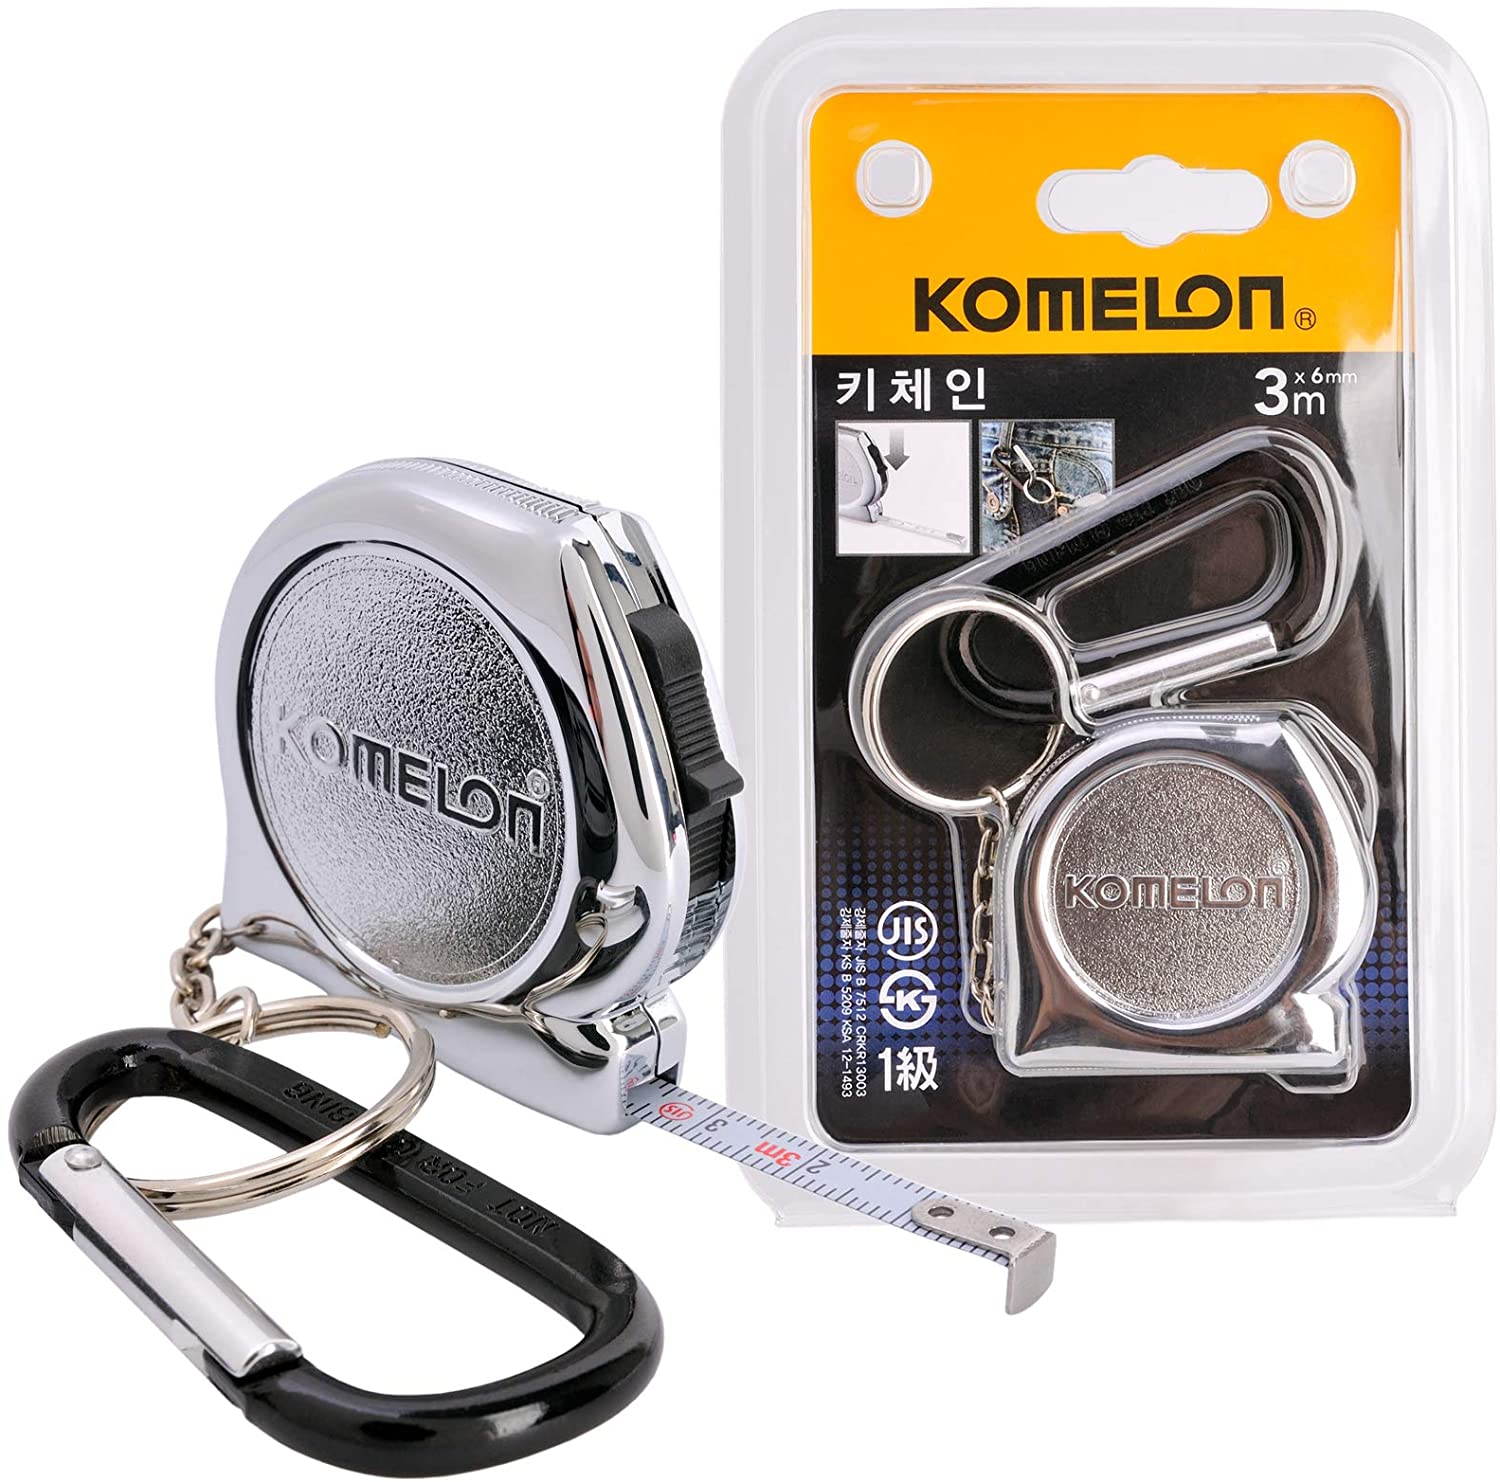 Komelon, KOMELON KMC-74K Pro Easy Chrome Case Tape Measure 3m x 6mm Metric Rulers Key Chain Key-Ring with Carabiner Clip Accessory